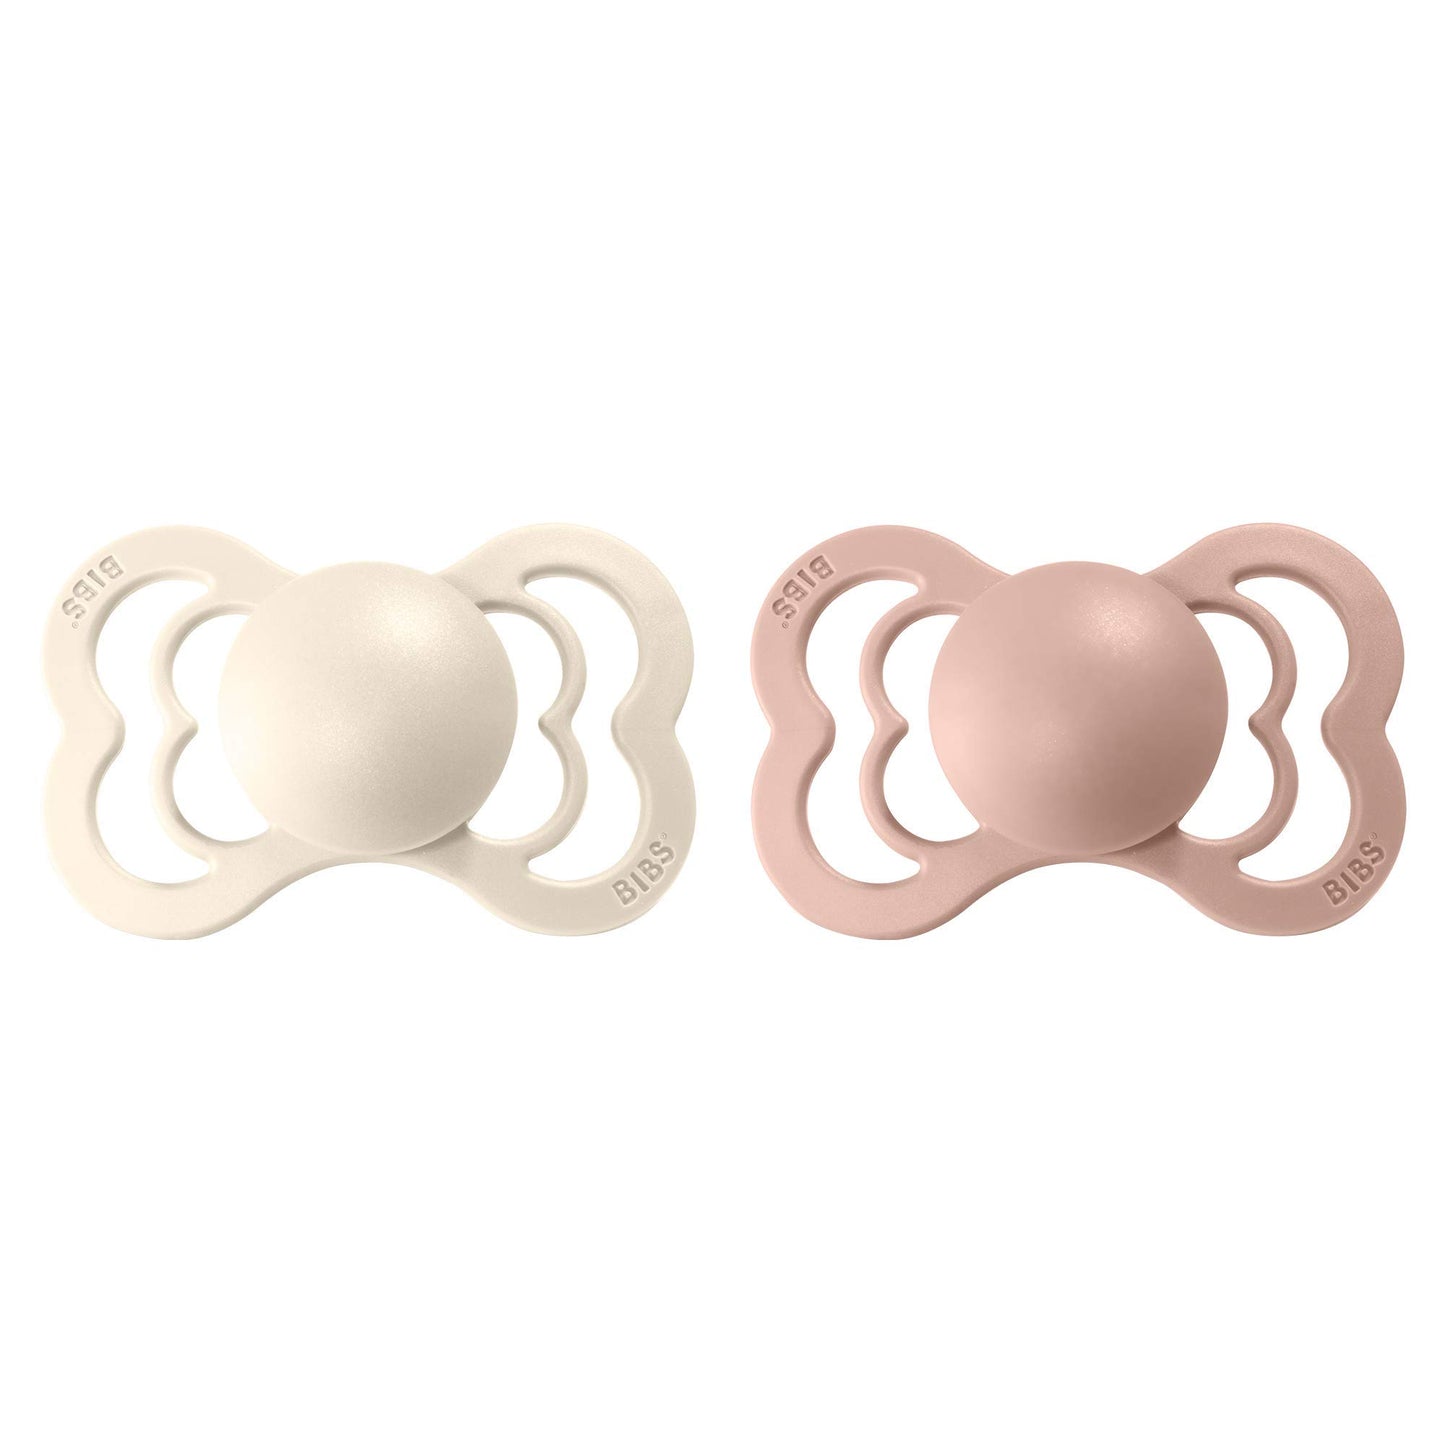 BIBS Supreme Baby Pacifier 2-Pack | Made in Denmark | BPA Free Dummy Soother, Symmetrical Silicone, Size 2 (6-18 Months), Ivory/Blush